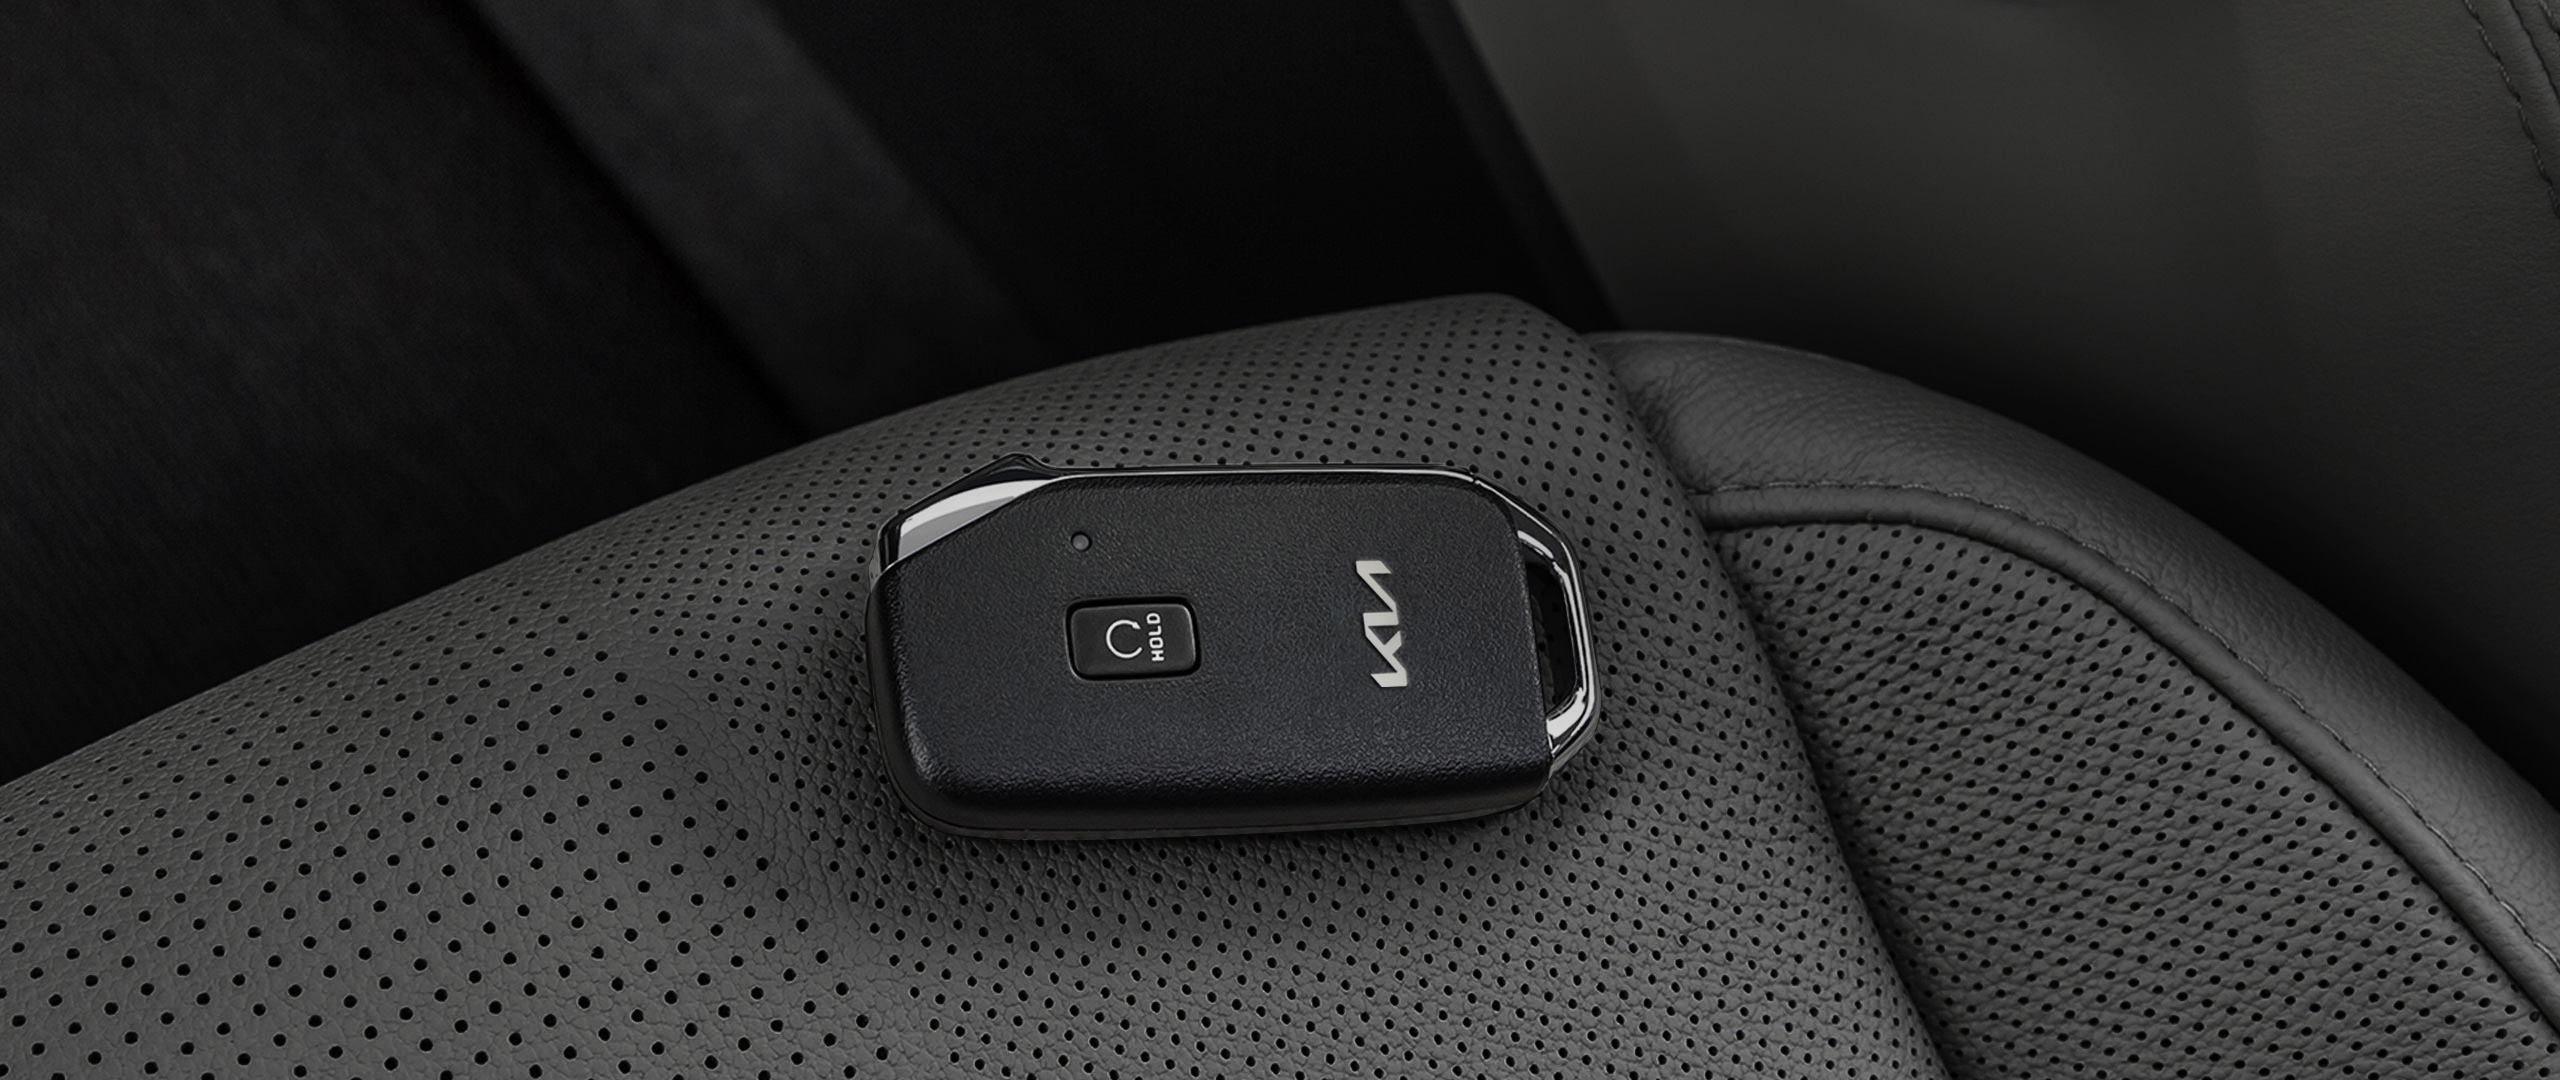 2023 Kia Forte Smart Key With Push Button Start And Remote Start Close-Up